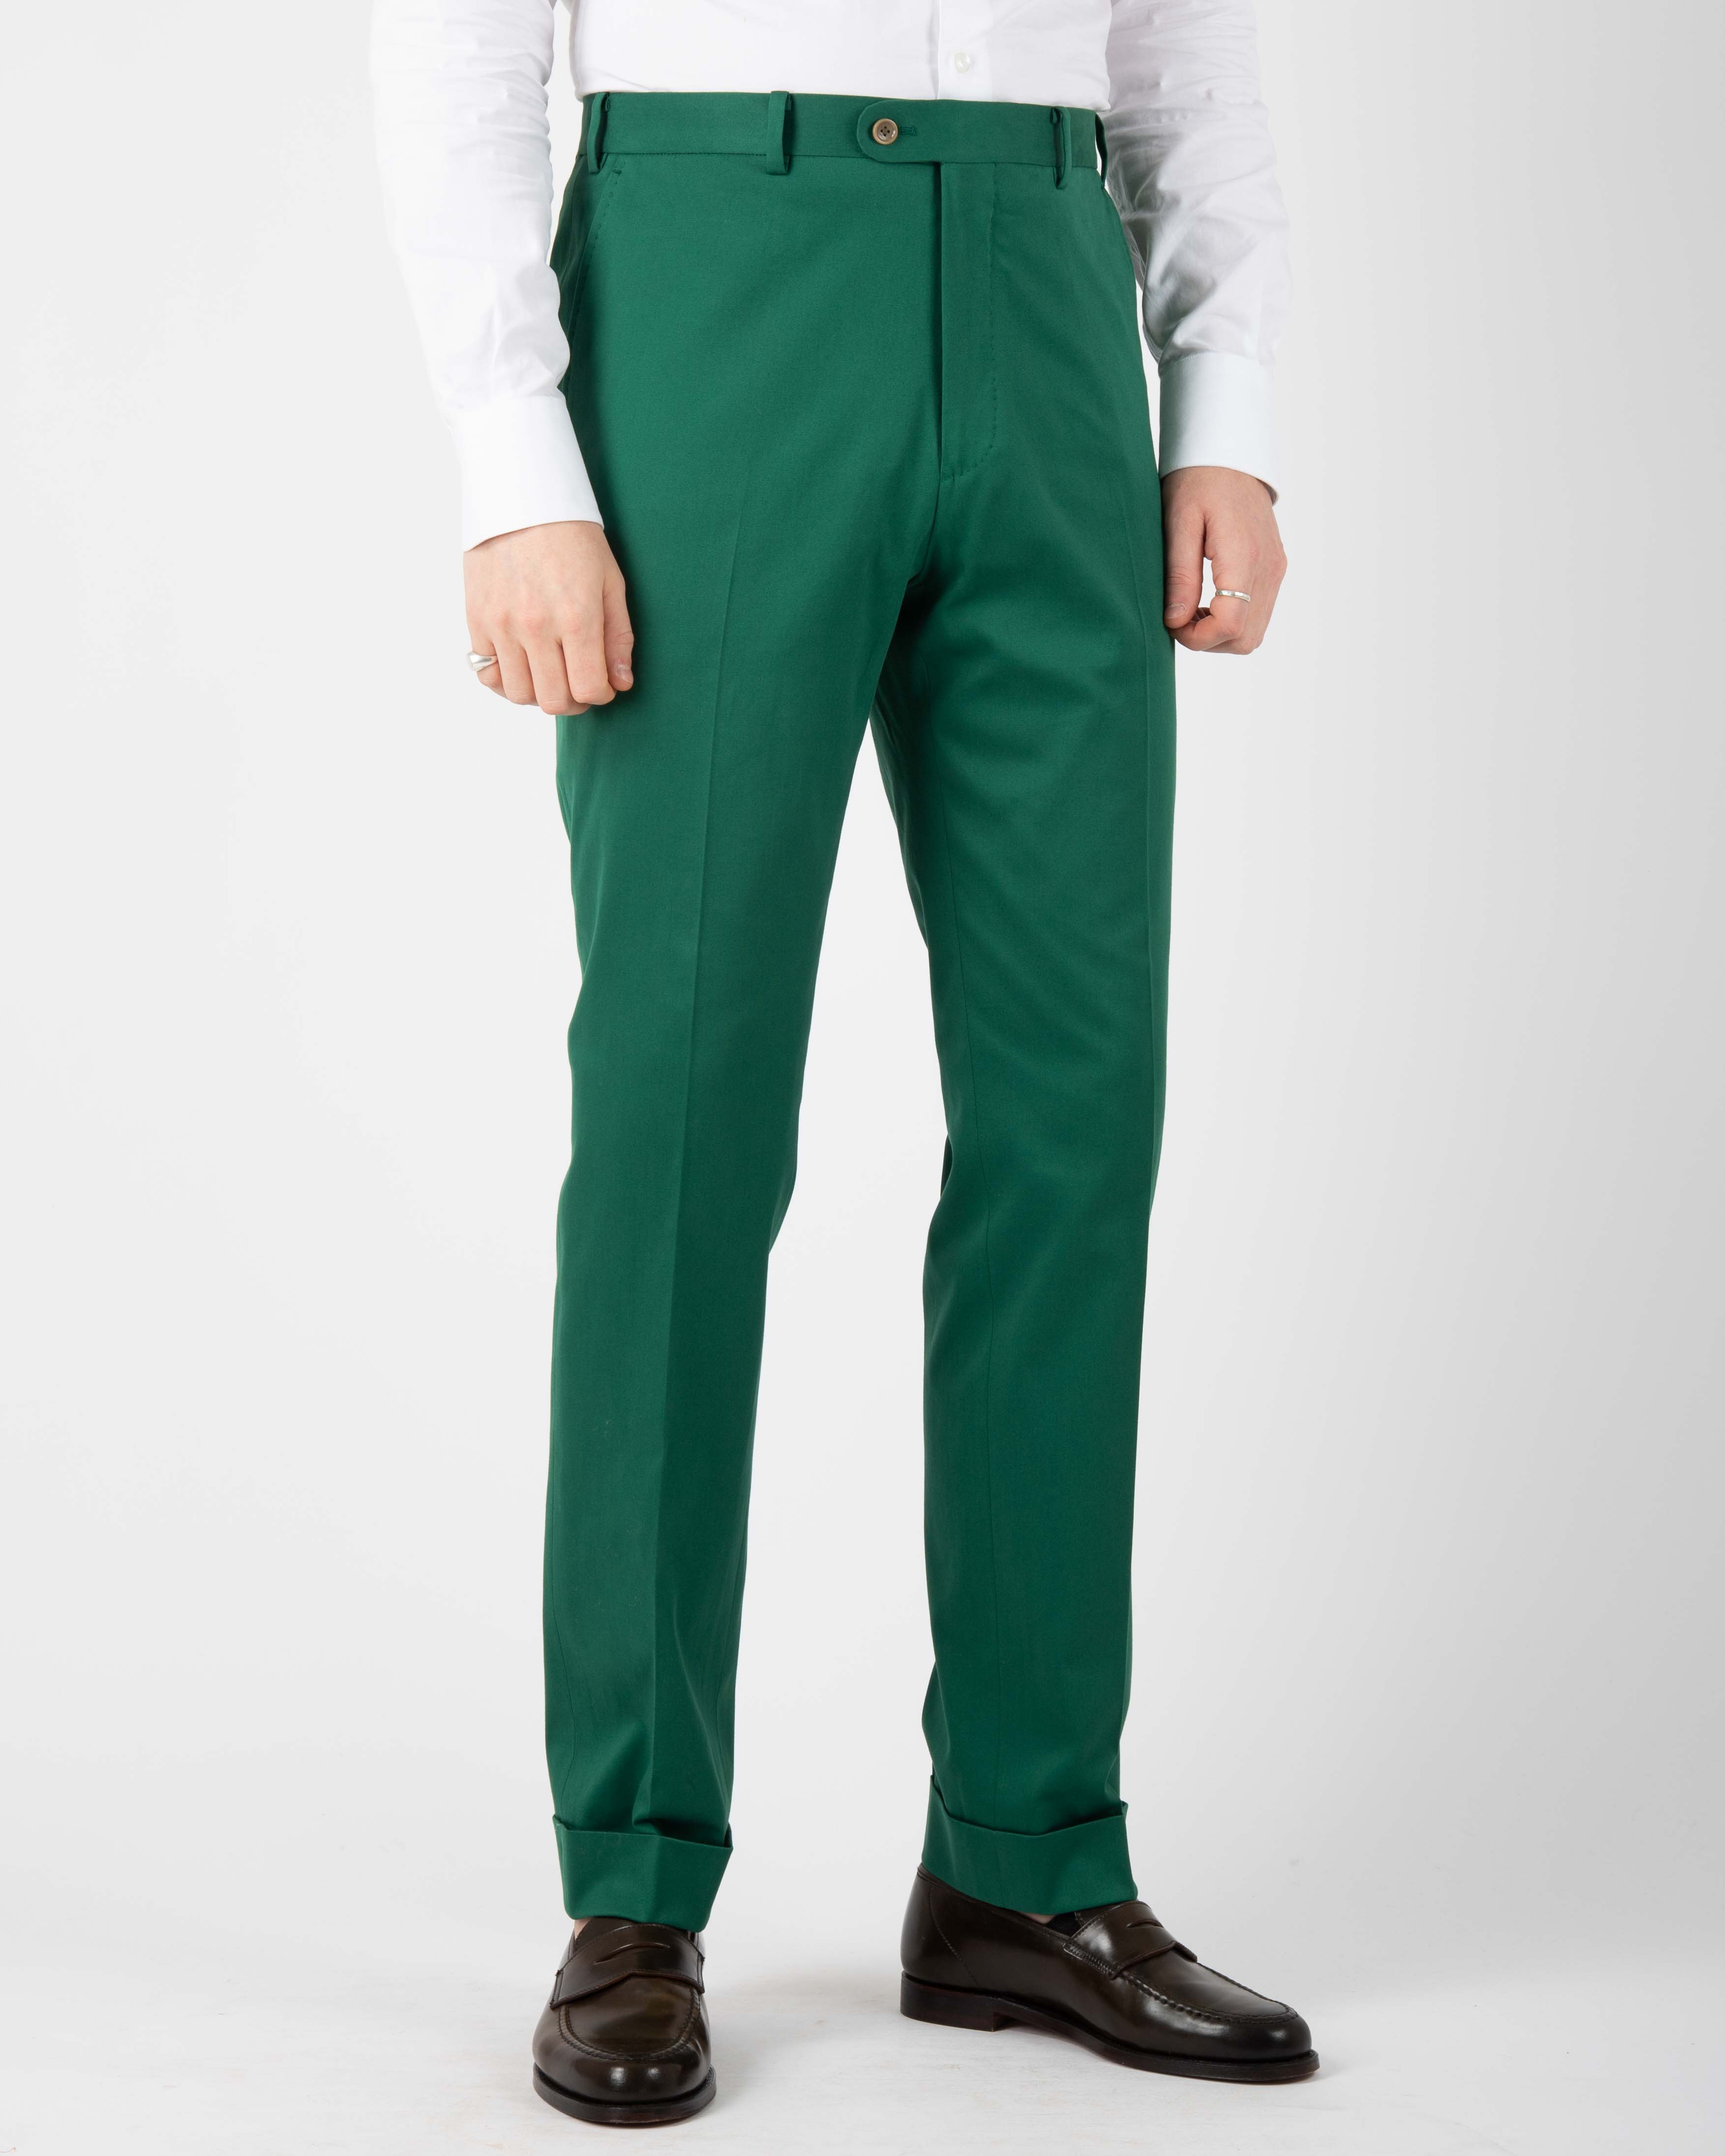 Flat Front Trouser in Cream Stretch Cotton Twill - Cad & The Dandy-atpcosmetics.com.vn